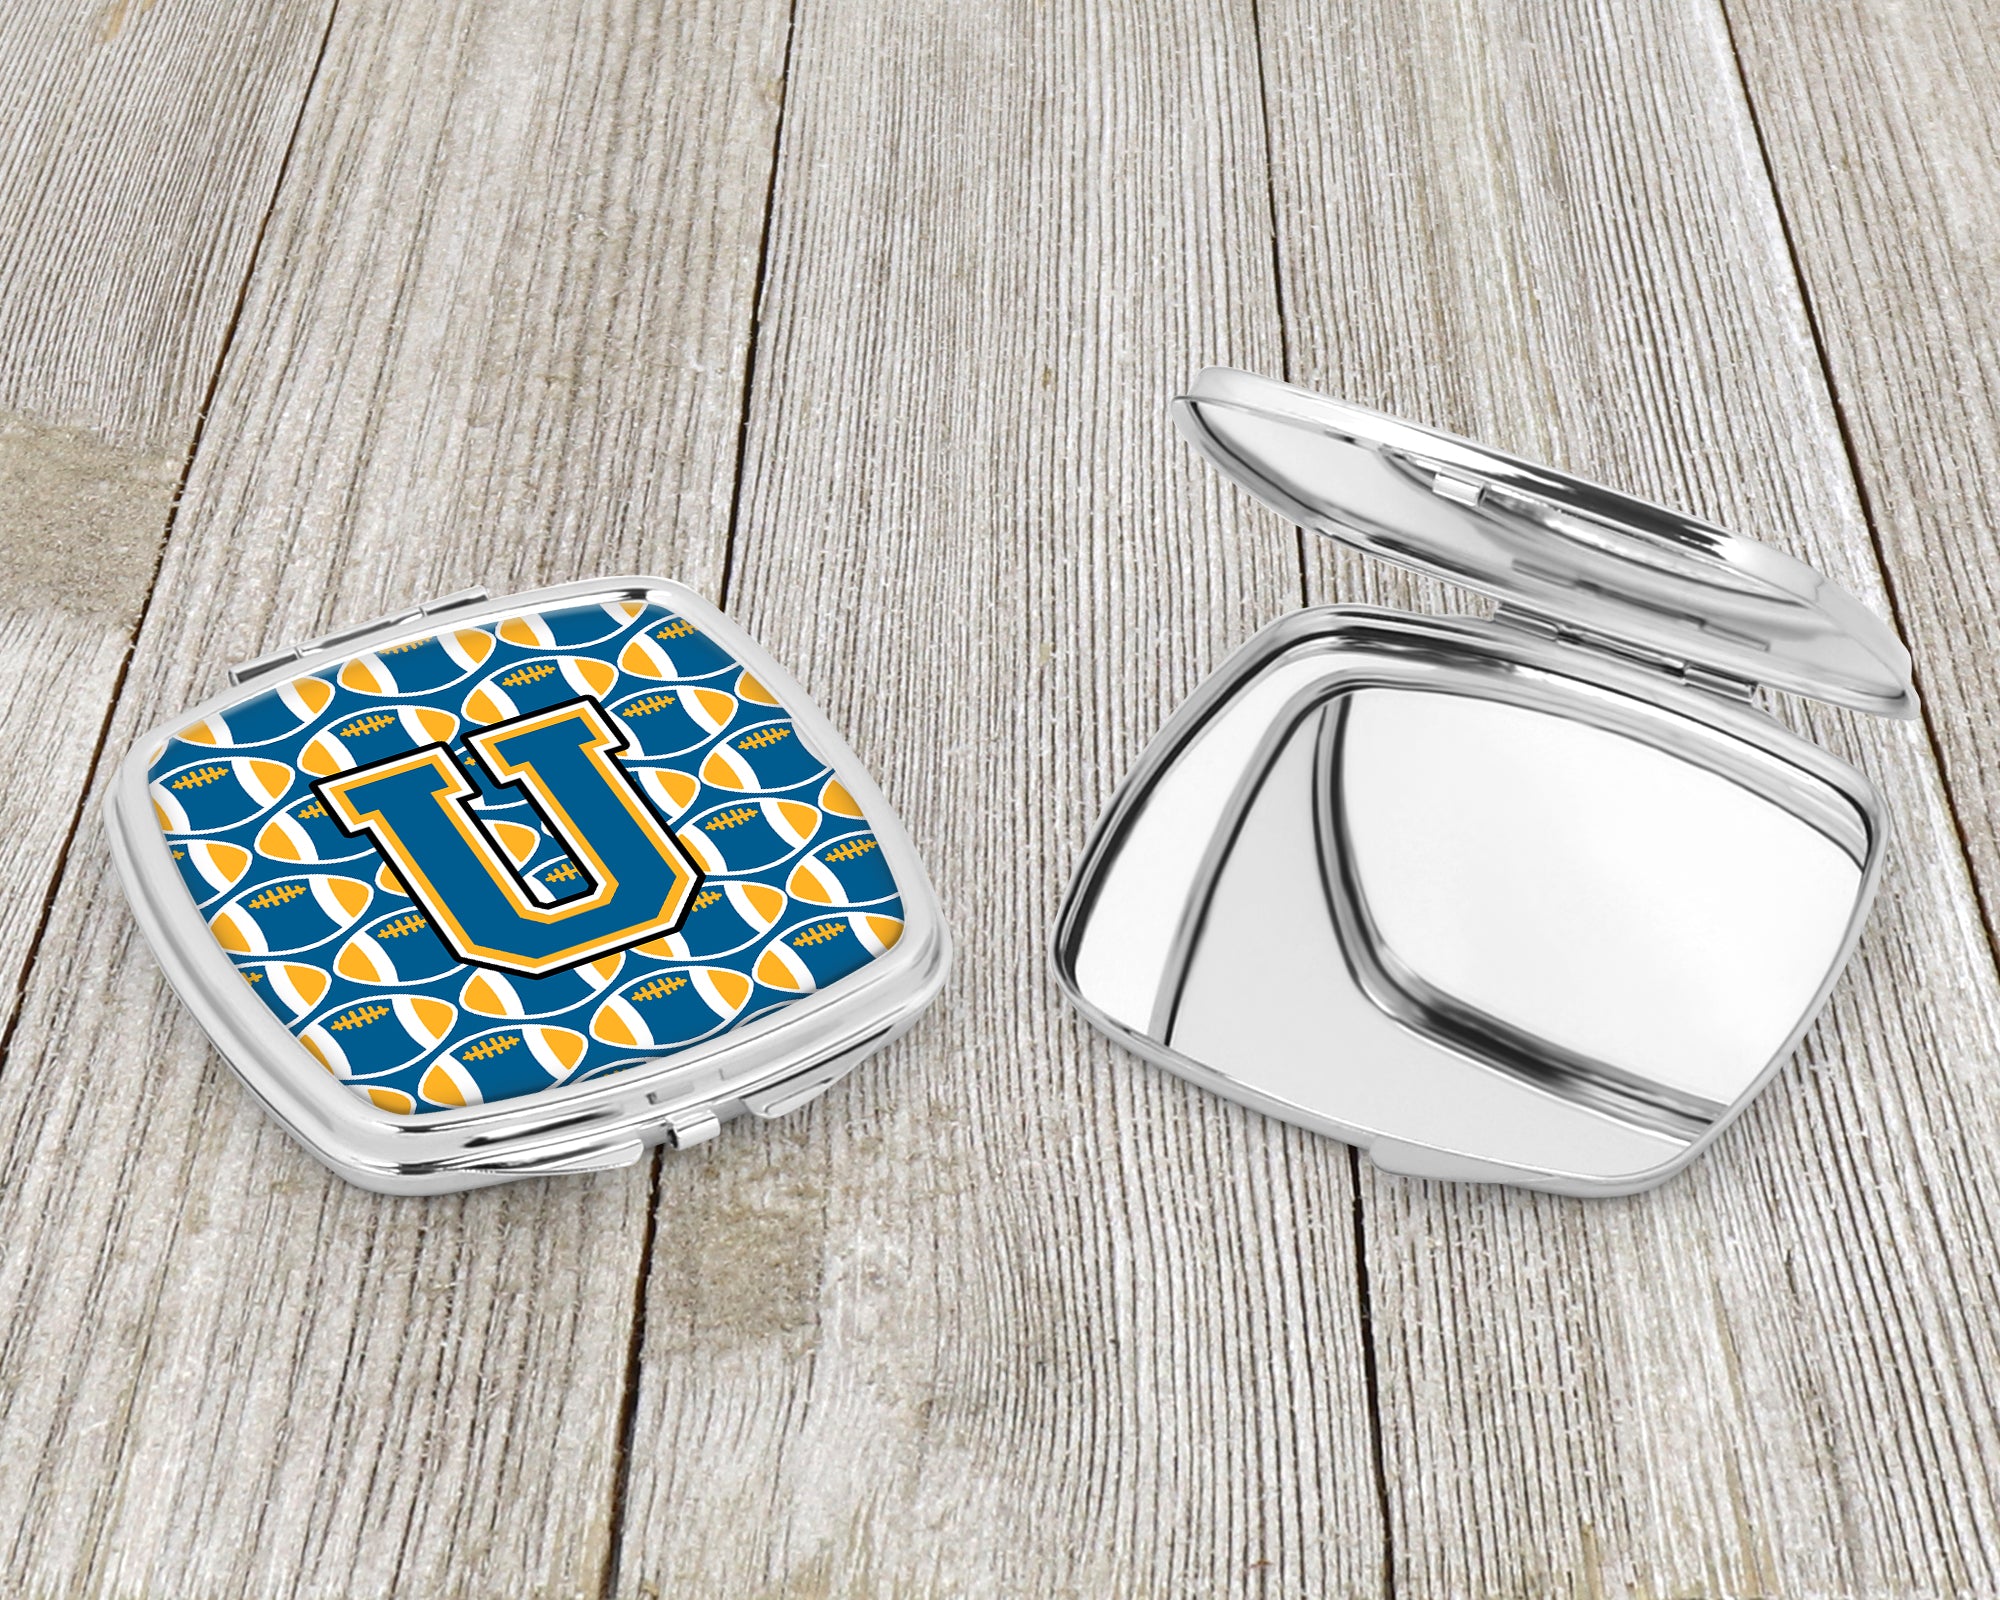 Letter U Football Blue and Gold Compact Mirror CJ1077-USCM  the-store.com.